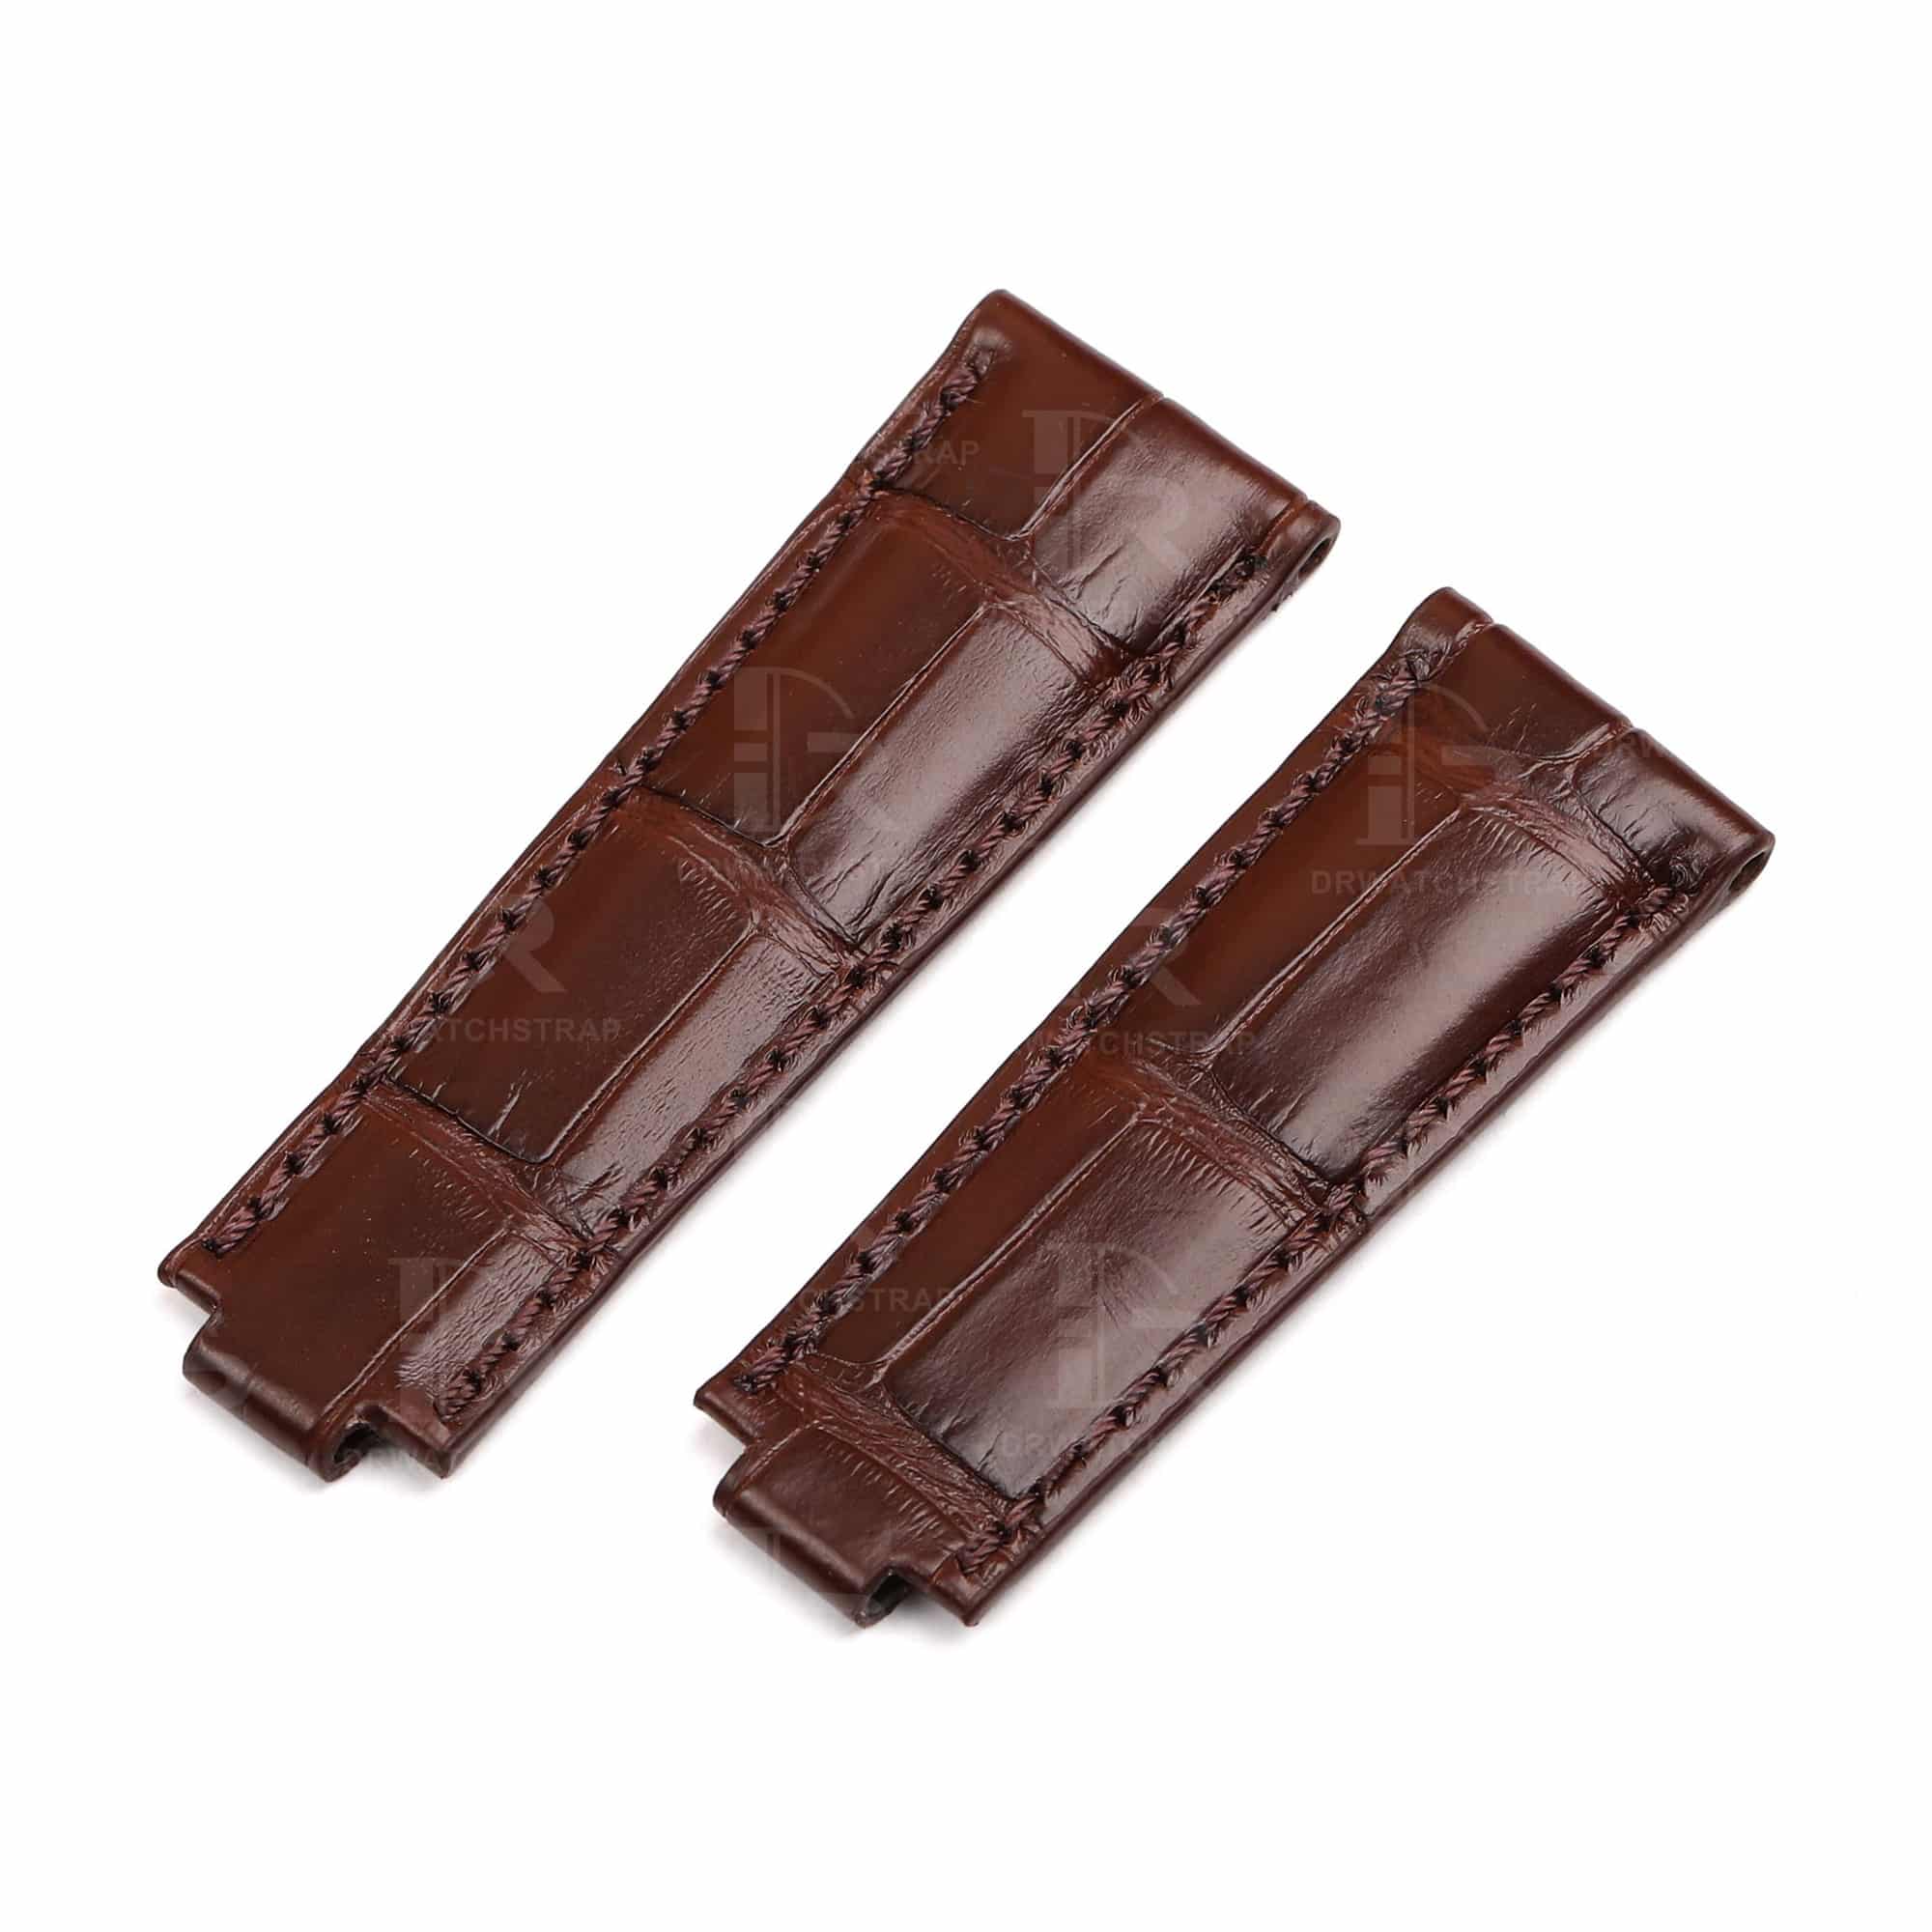 Buy Replacement Rolex Submariner watch band Brown alligator leather 20mm 21mm